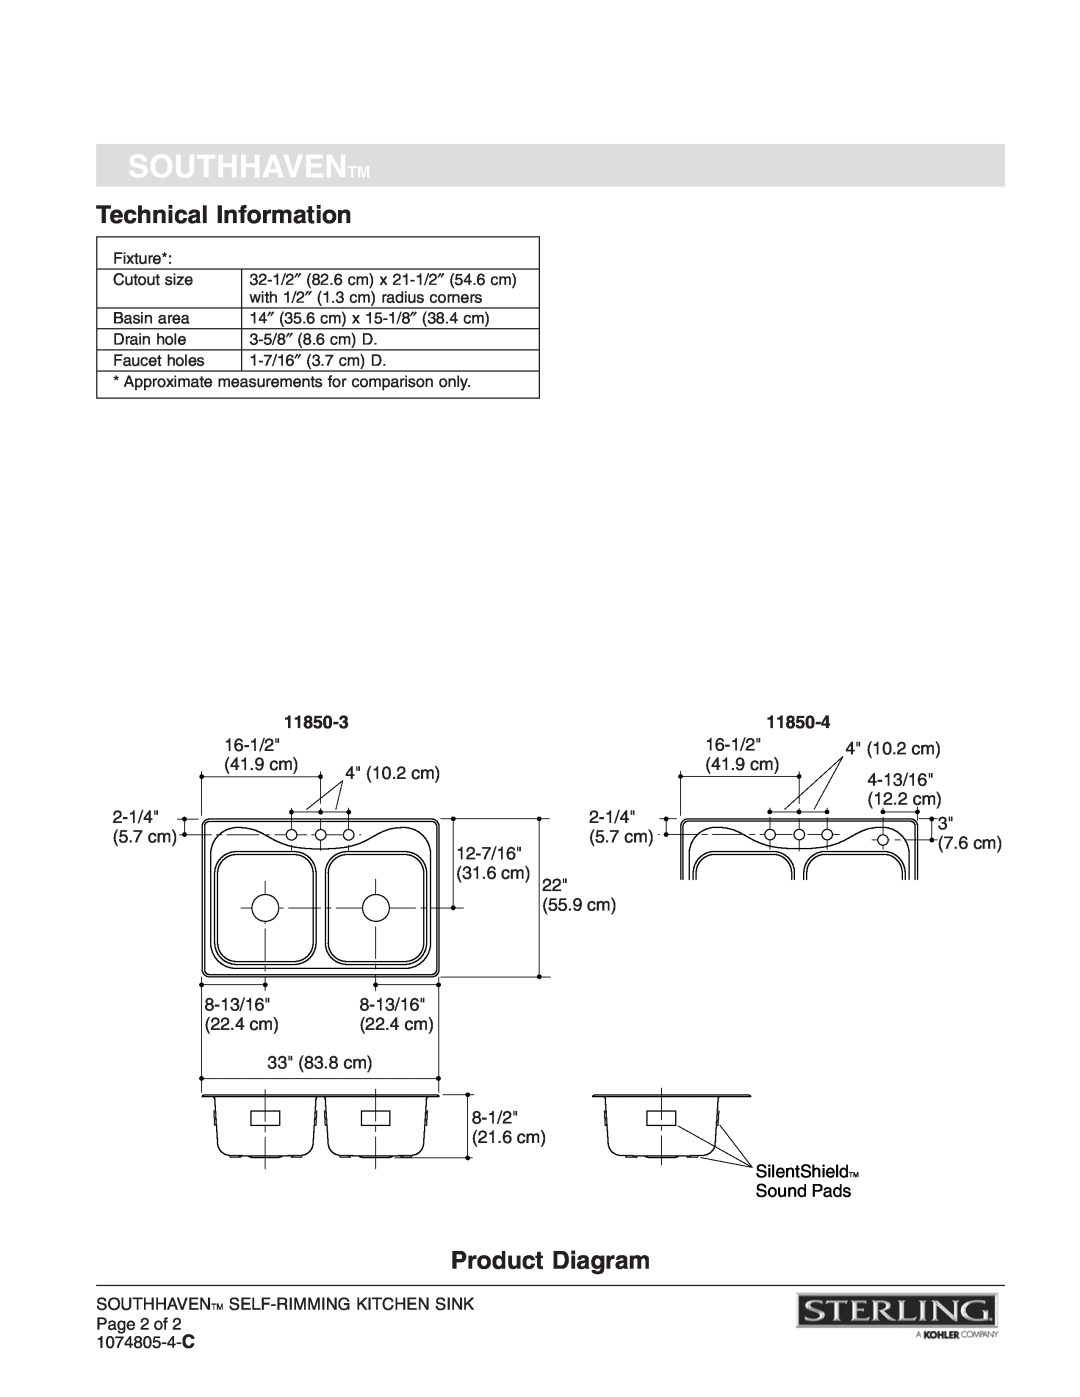 Sterling Plumbing installation instructions Technical Information, Product Diagram, Southhaventm, 11850-3, 11850-4 